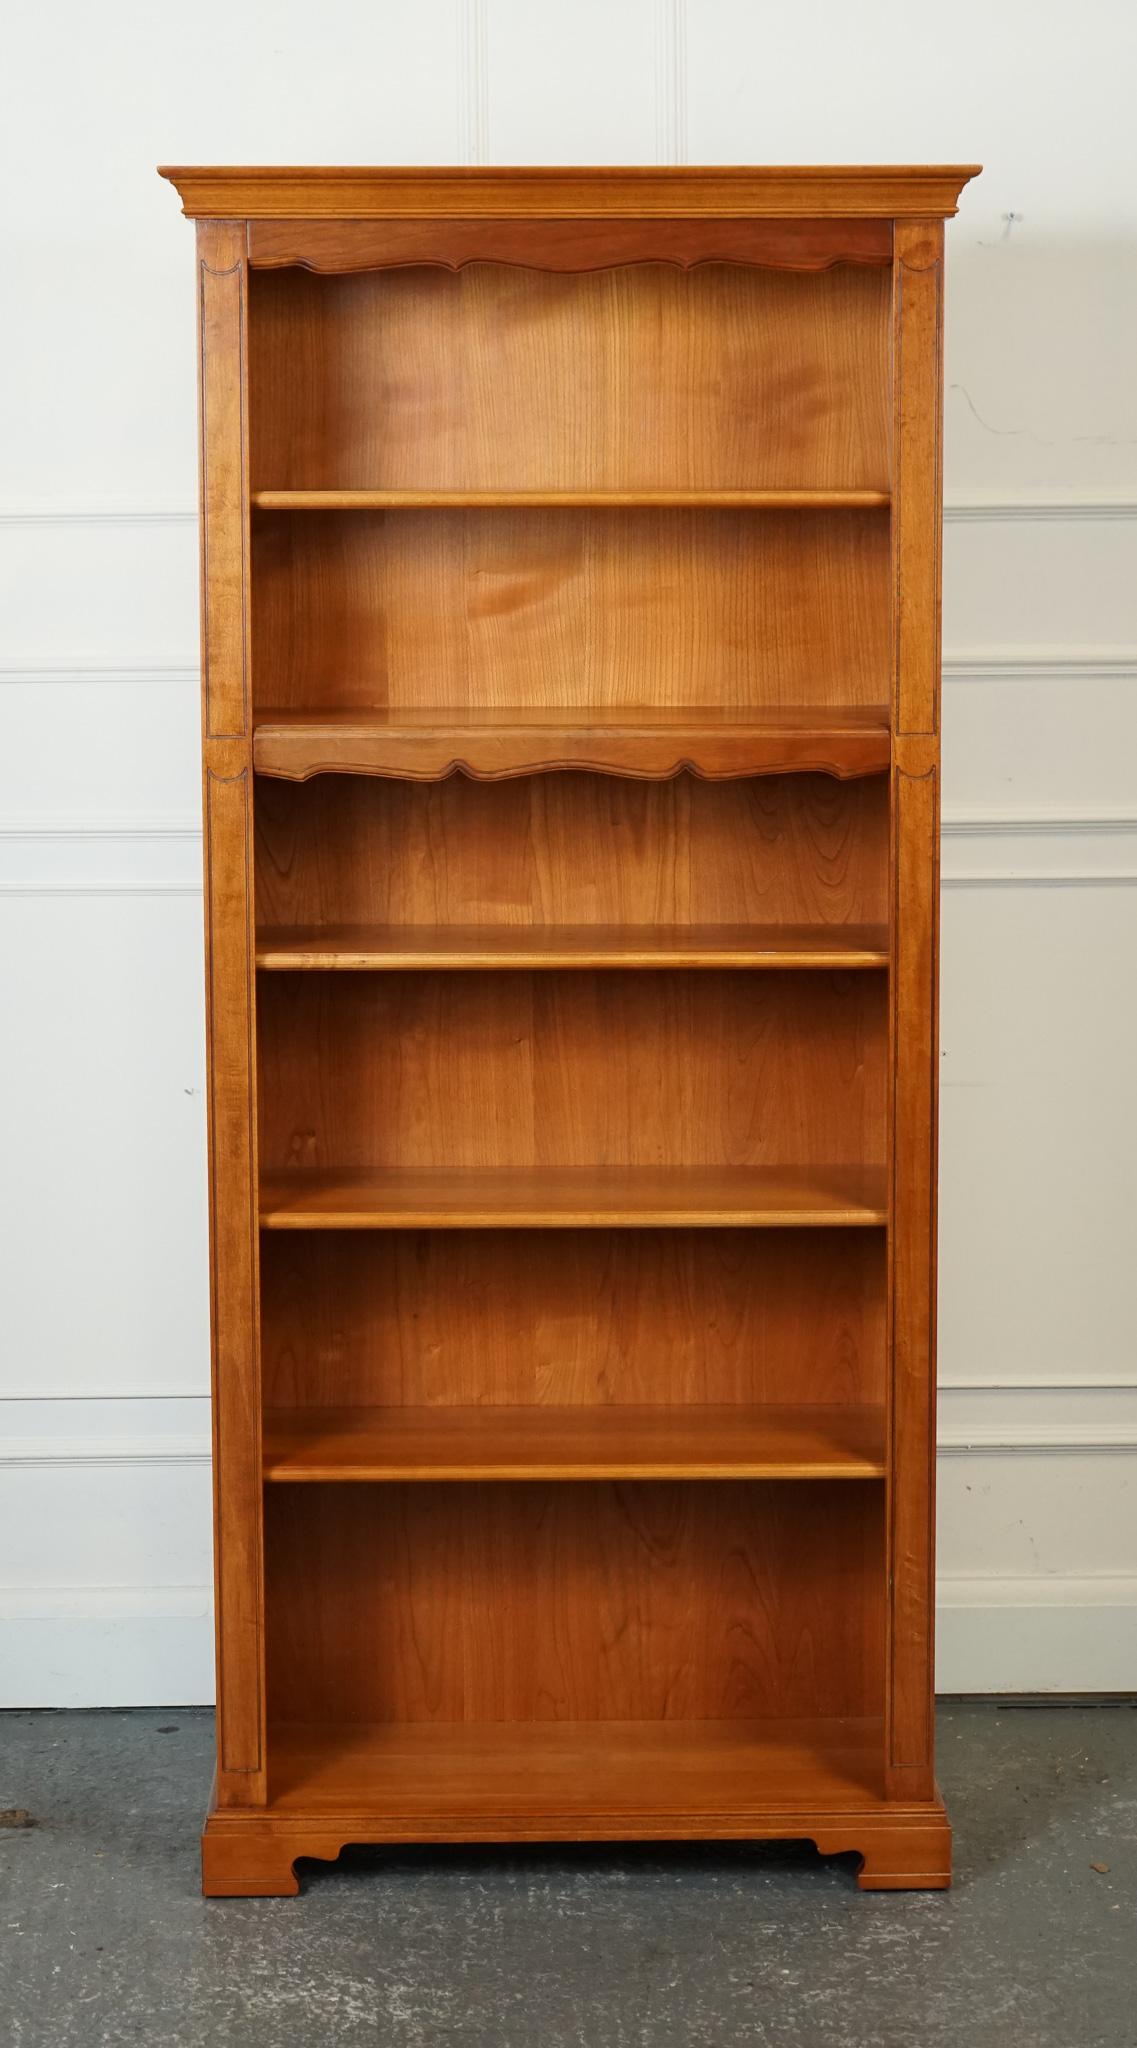 VINTAGE TALL OPEN SOLID BOOKCASE 5 SHELVES MADE BY YOUNGER FURNITURE LONDON j1 In Good Condition For Sale In Pulborough, GB